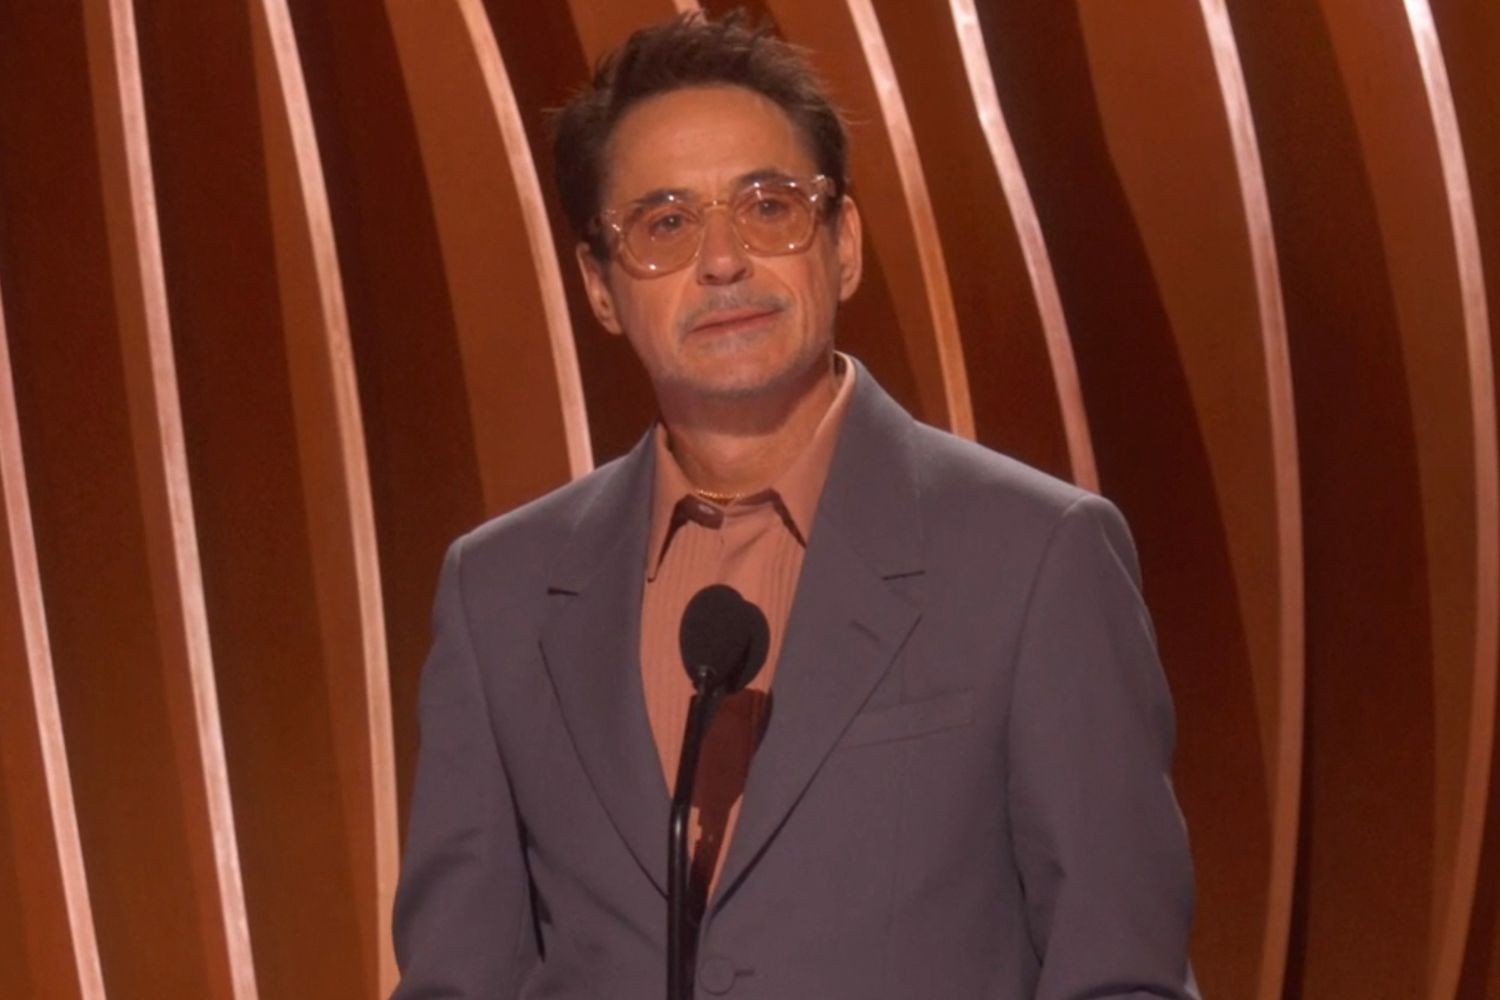 Robert Downey Jr. added another win for Best Supporting Actor at the SAG Awards